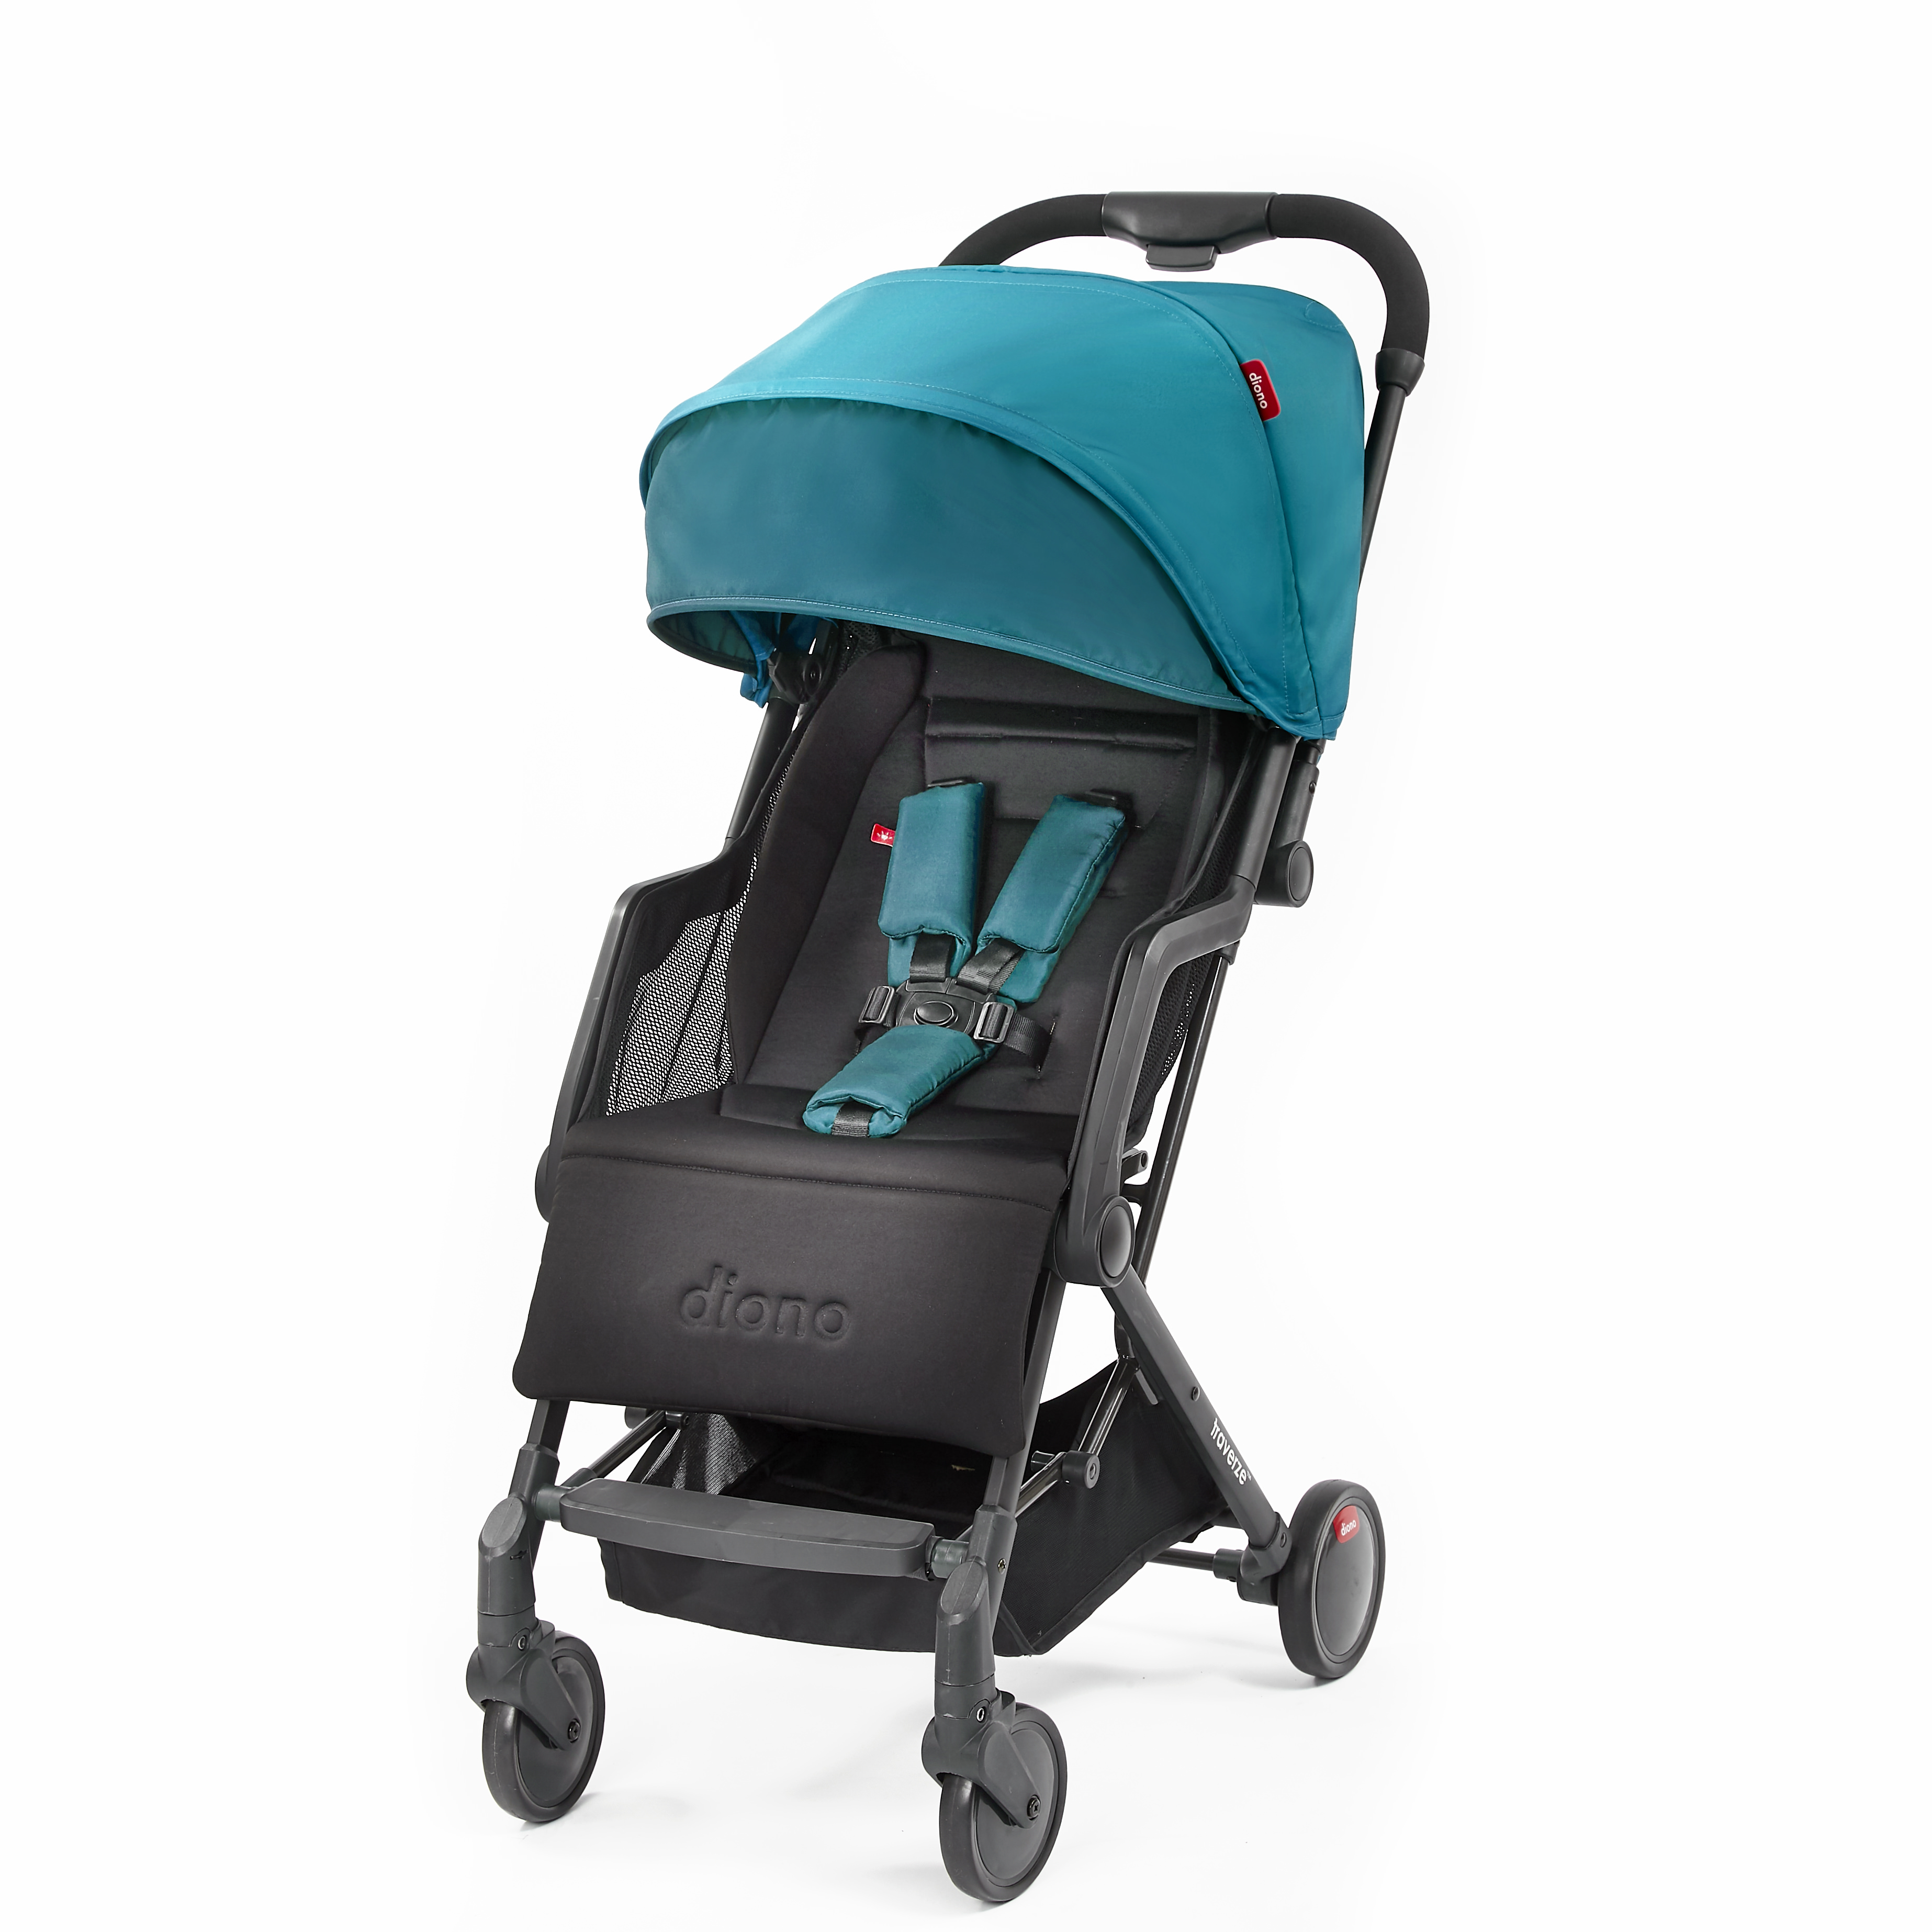 Diono Traverze Plus Lightweight Compact Stroller with Easy Fold, Teal - image 1 of 9